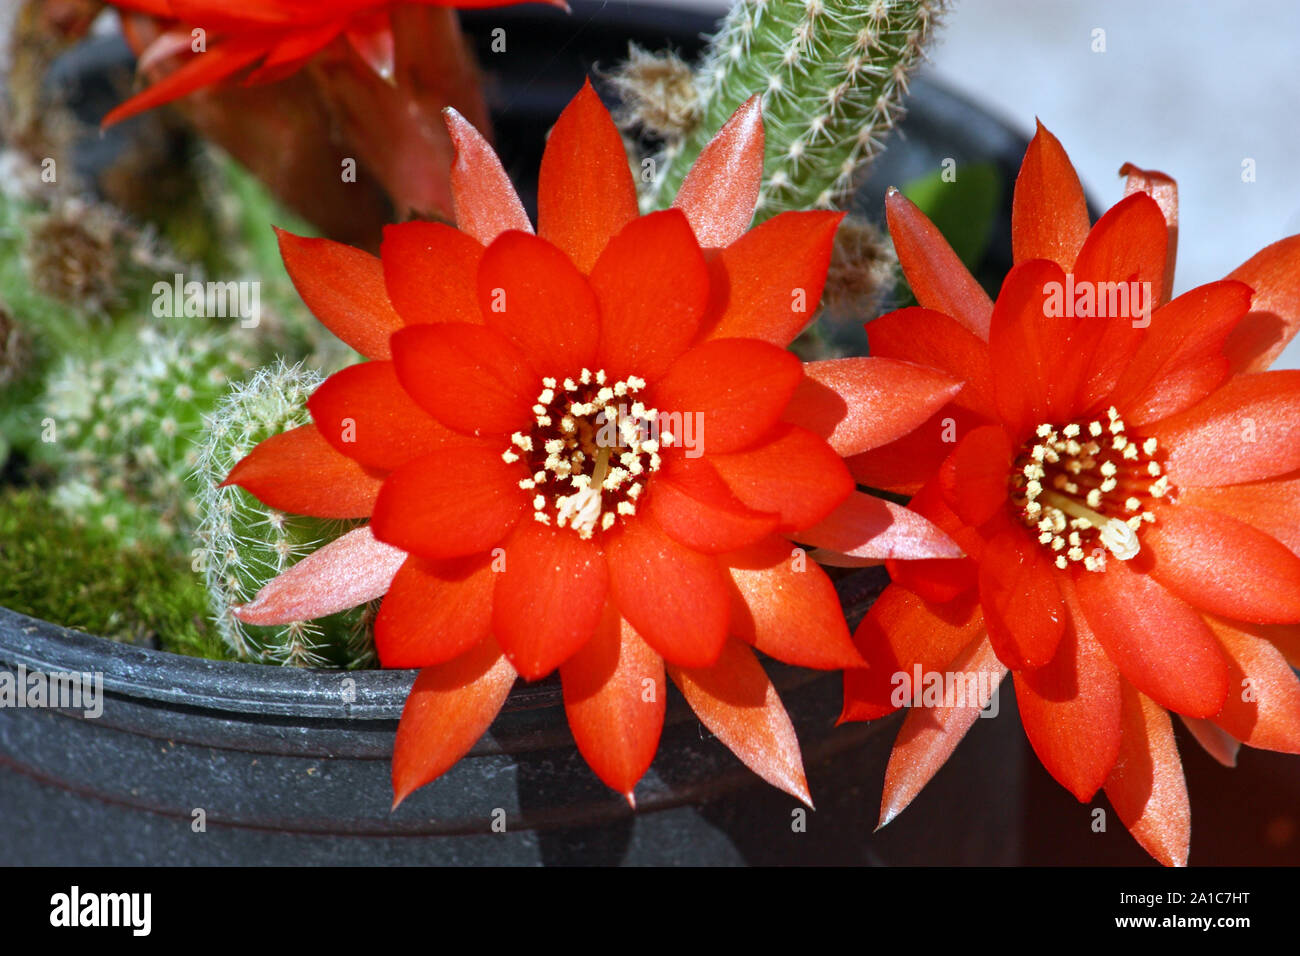 Beautiful red cactus flowers, home decoration Stock Photo